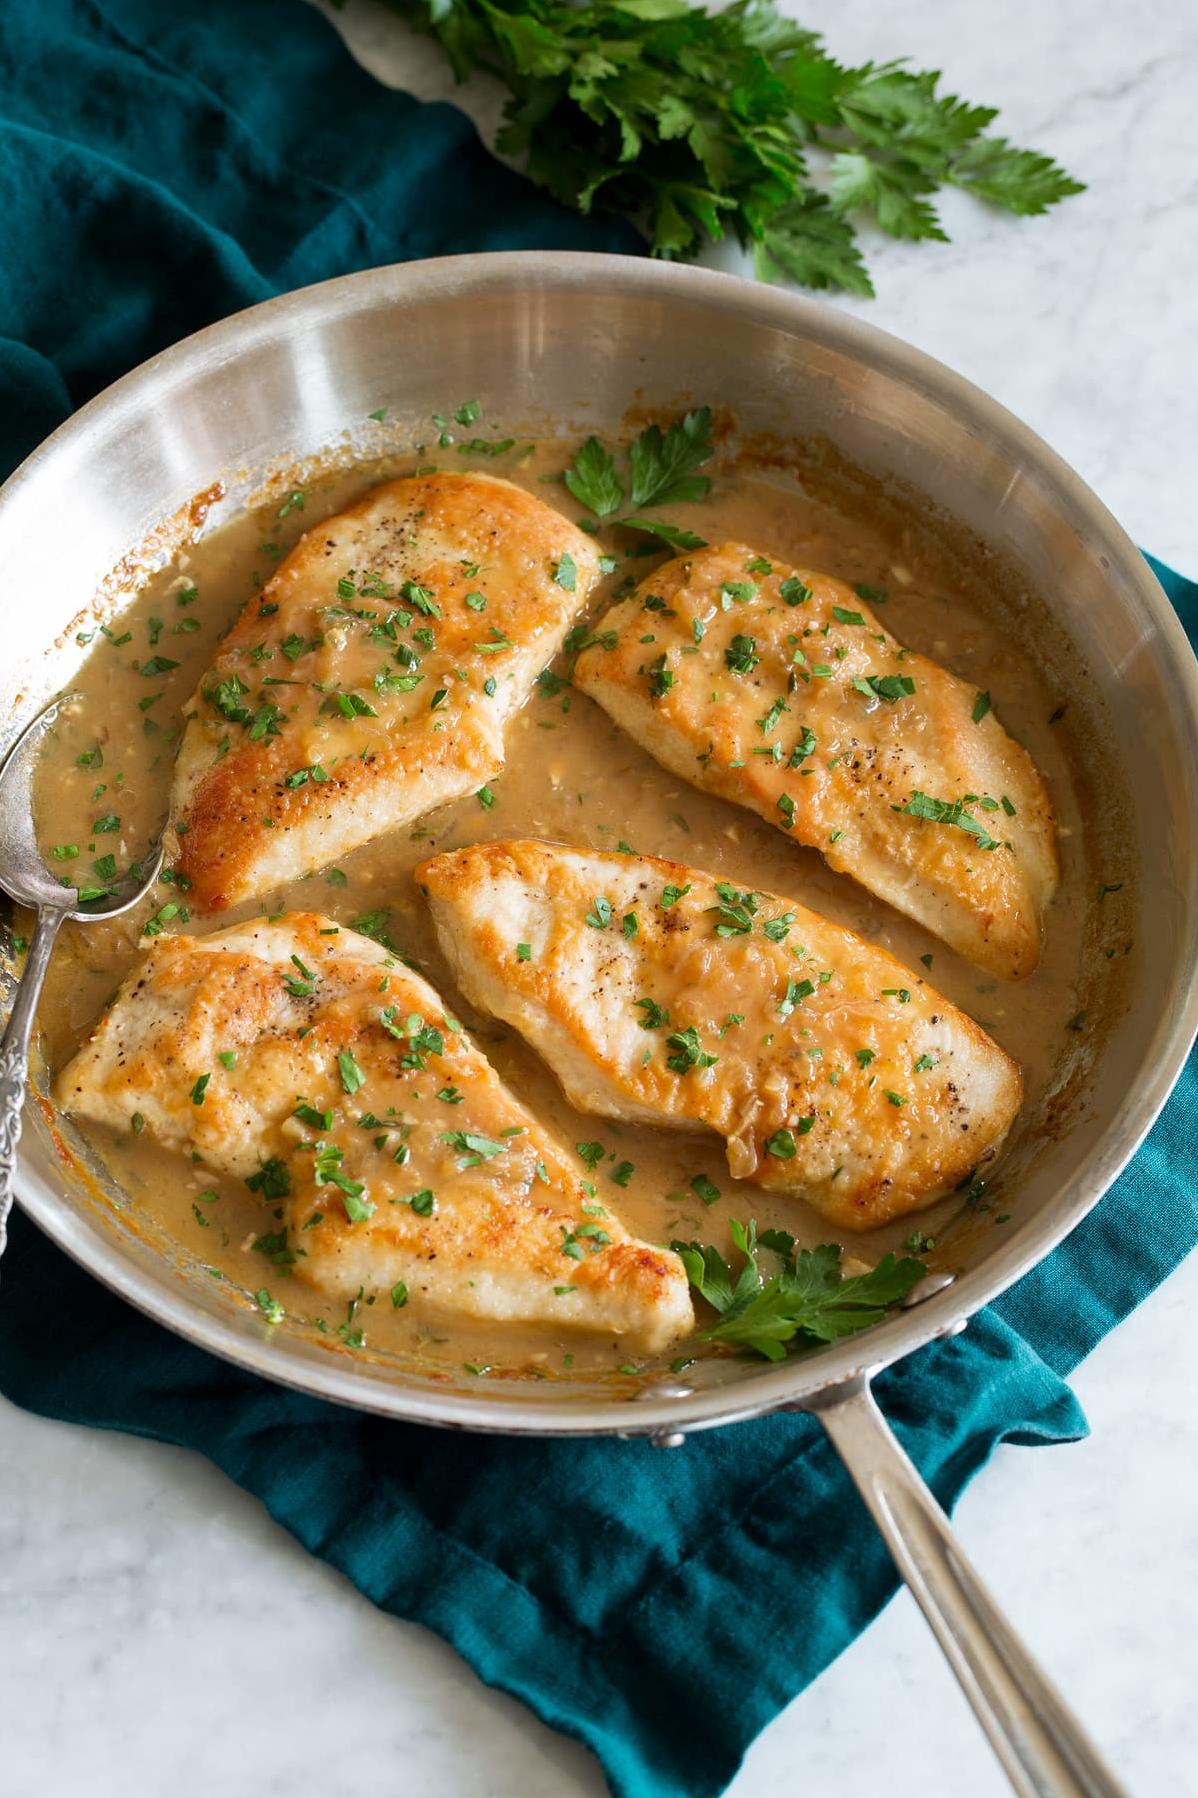  A golden-brown chicken drenched in a white wine & garlic sauce